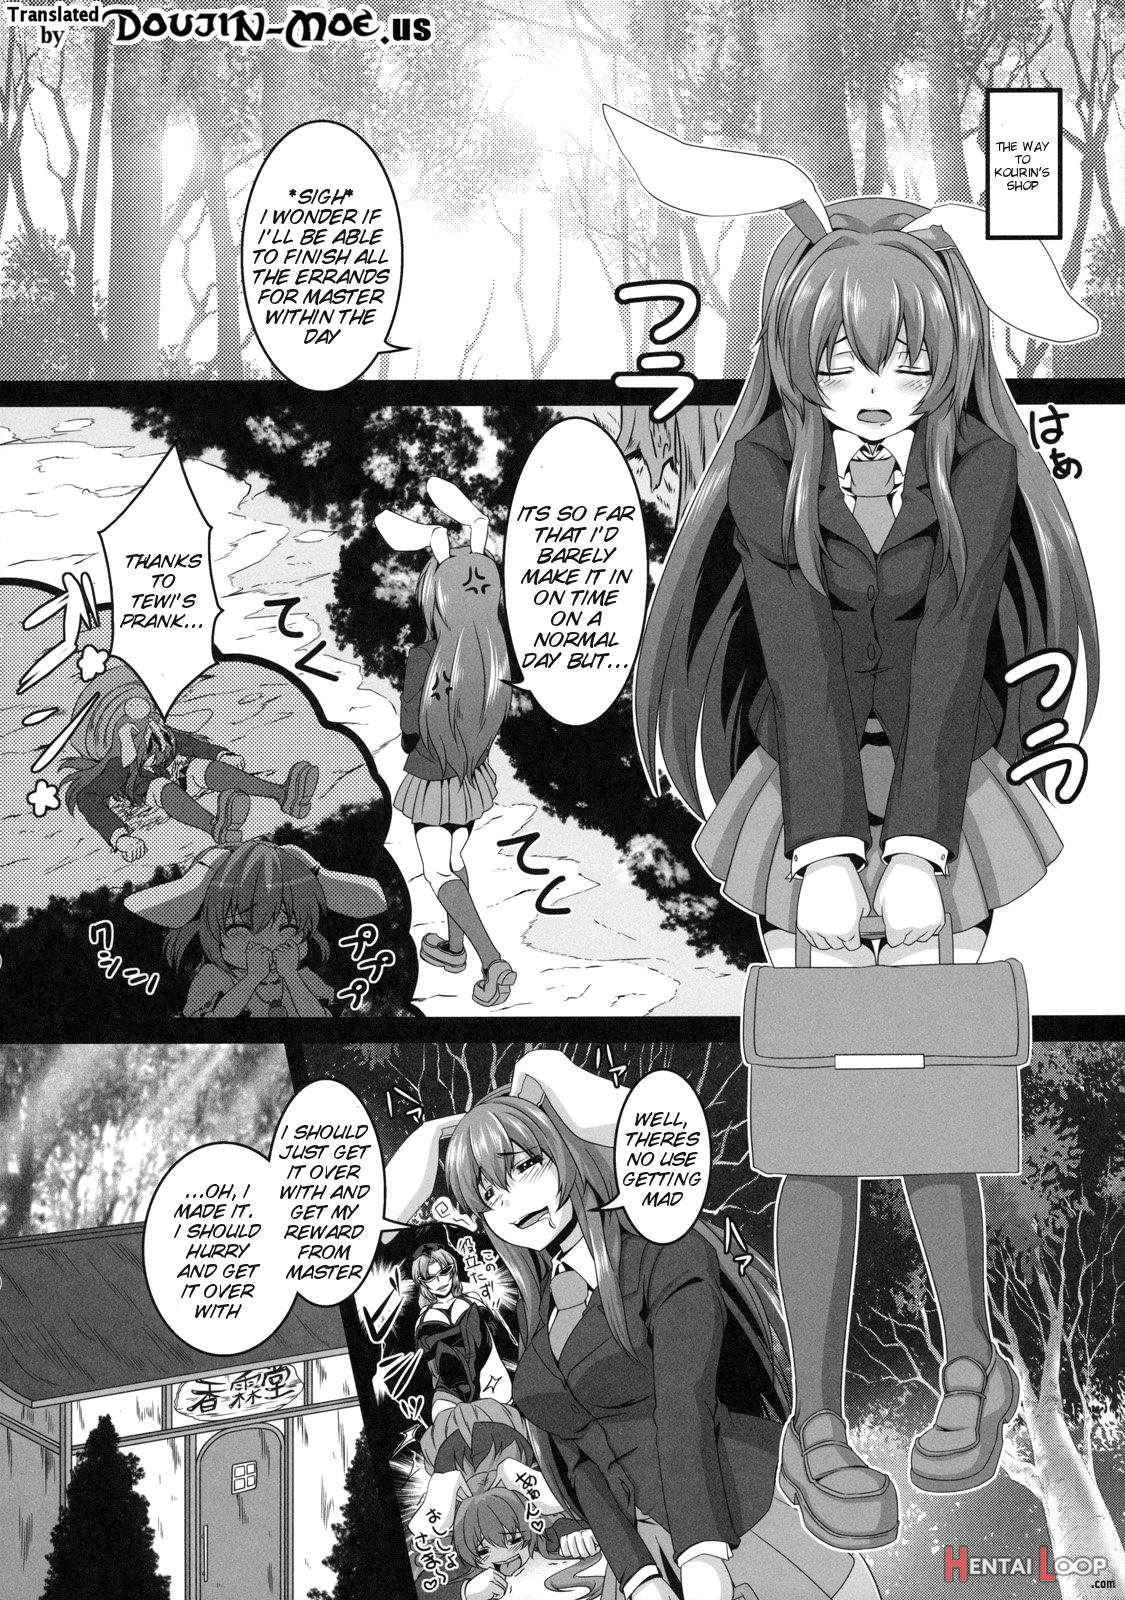 Reisen's Descent Into Madness page 3